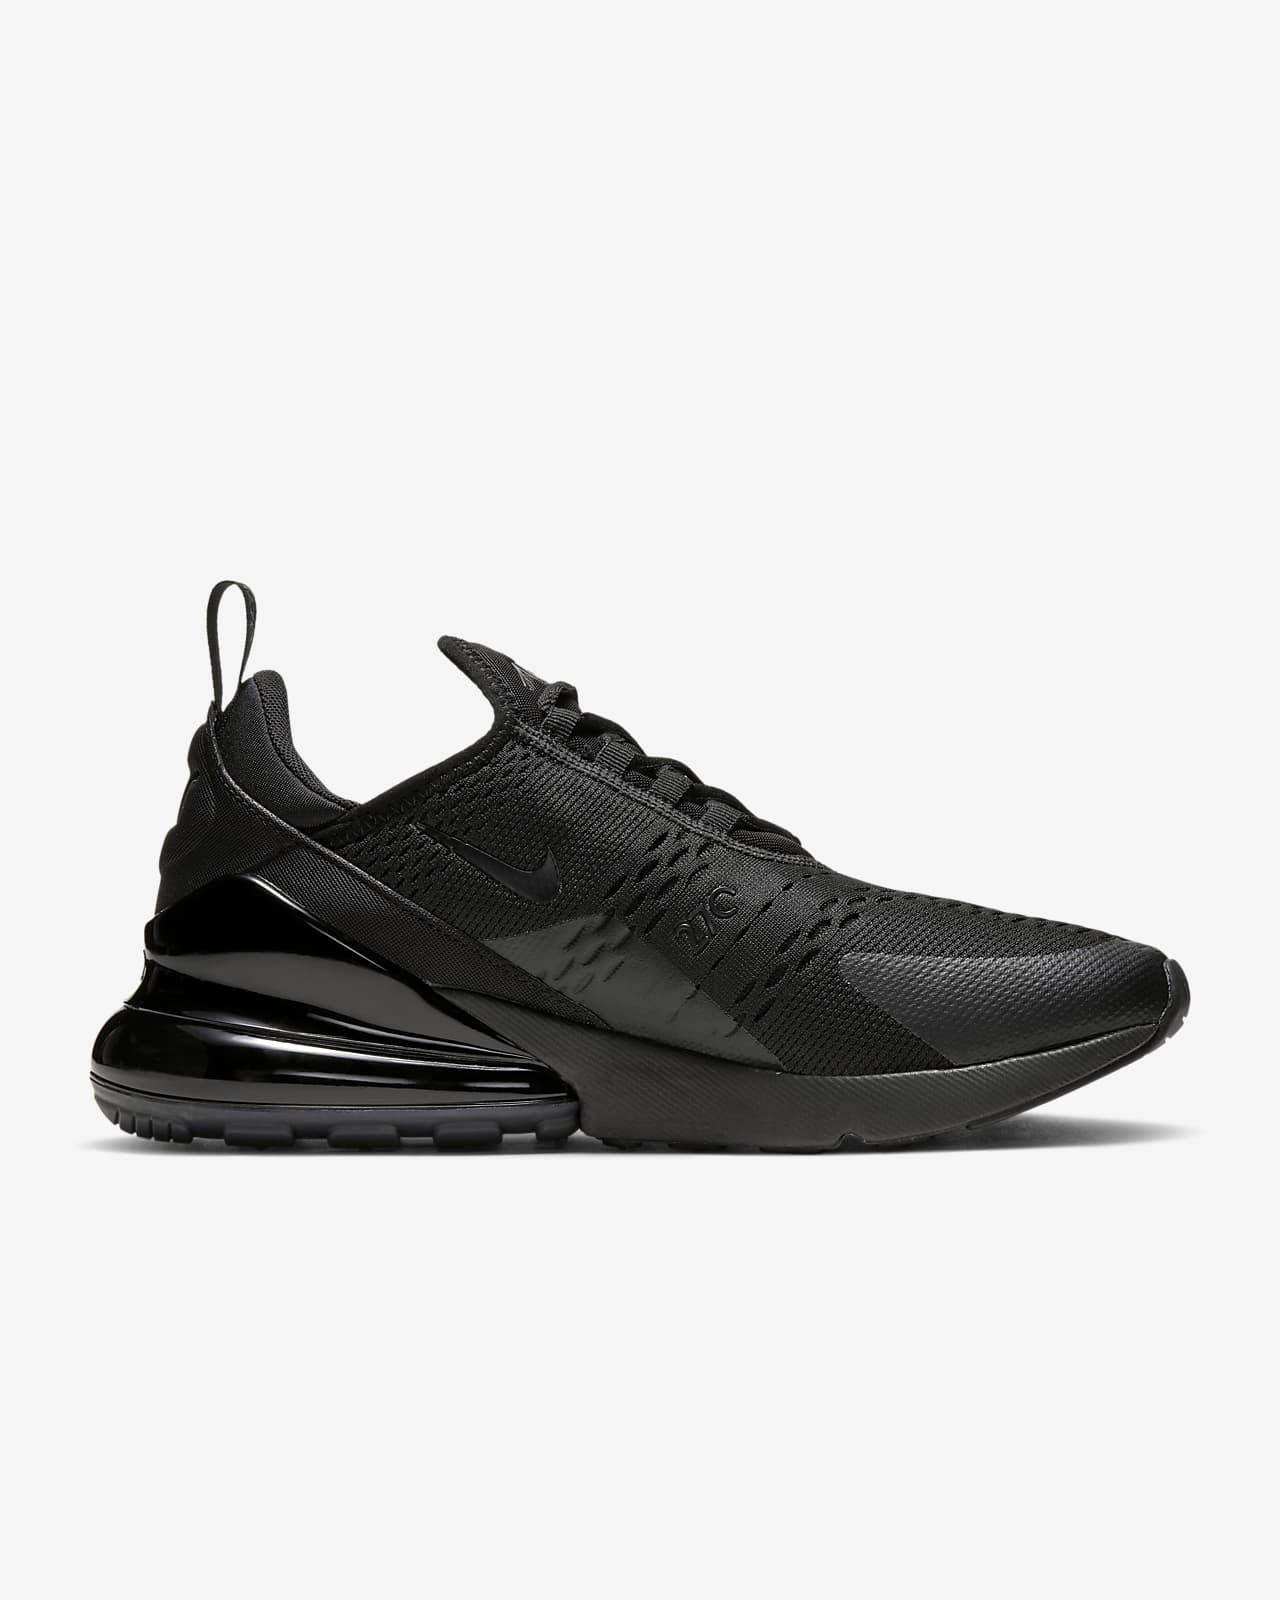 deer hell frequently Nike Air Max 270 Men's Shoes. Nike IN